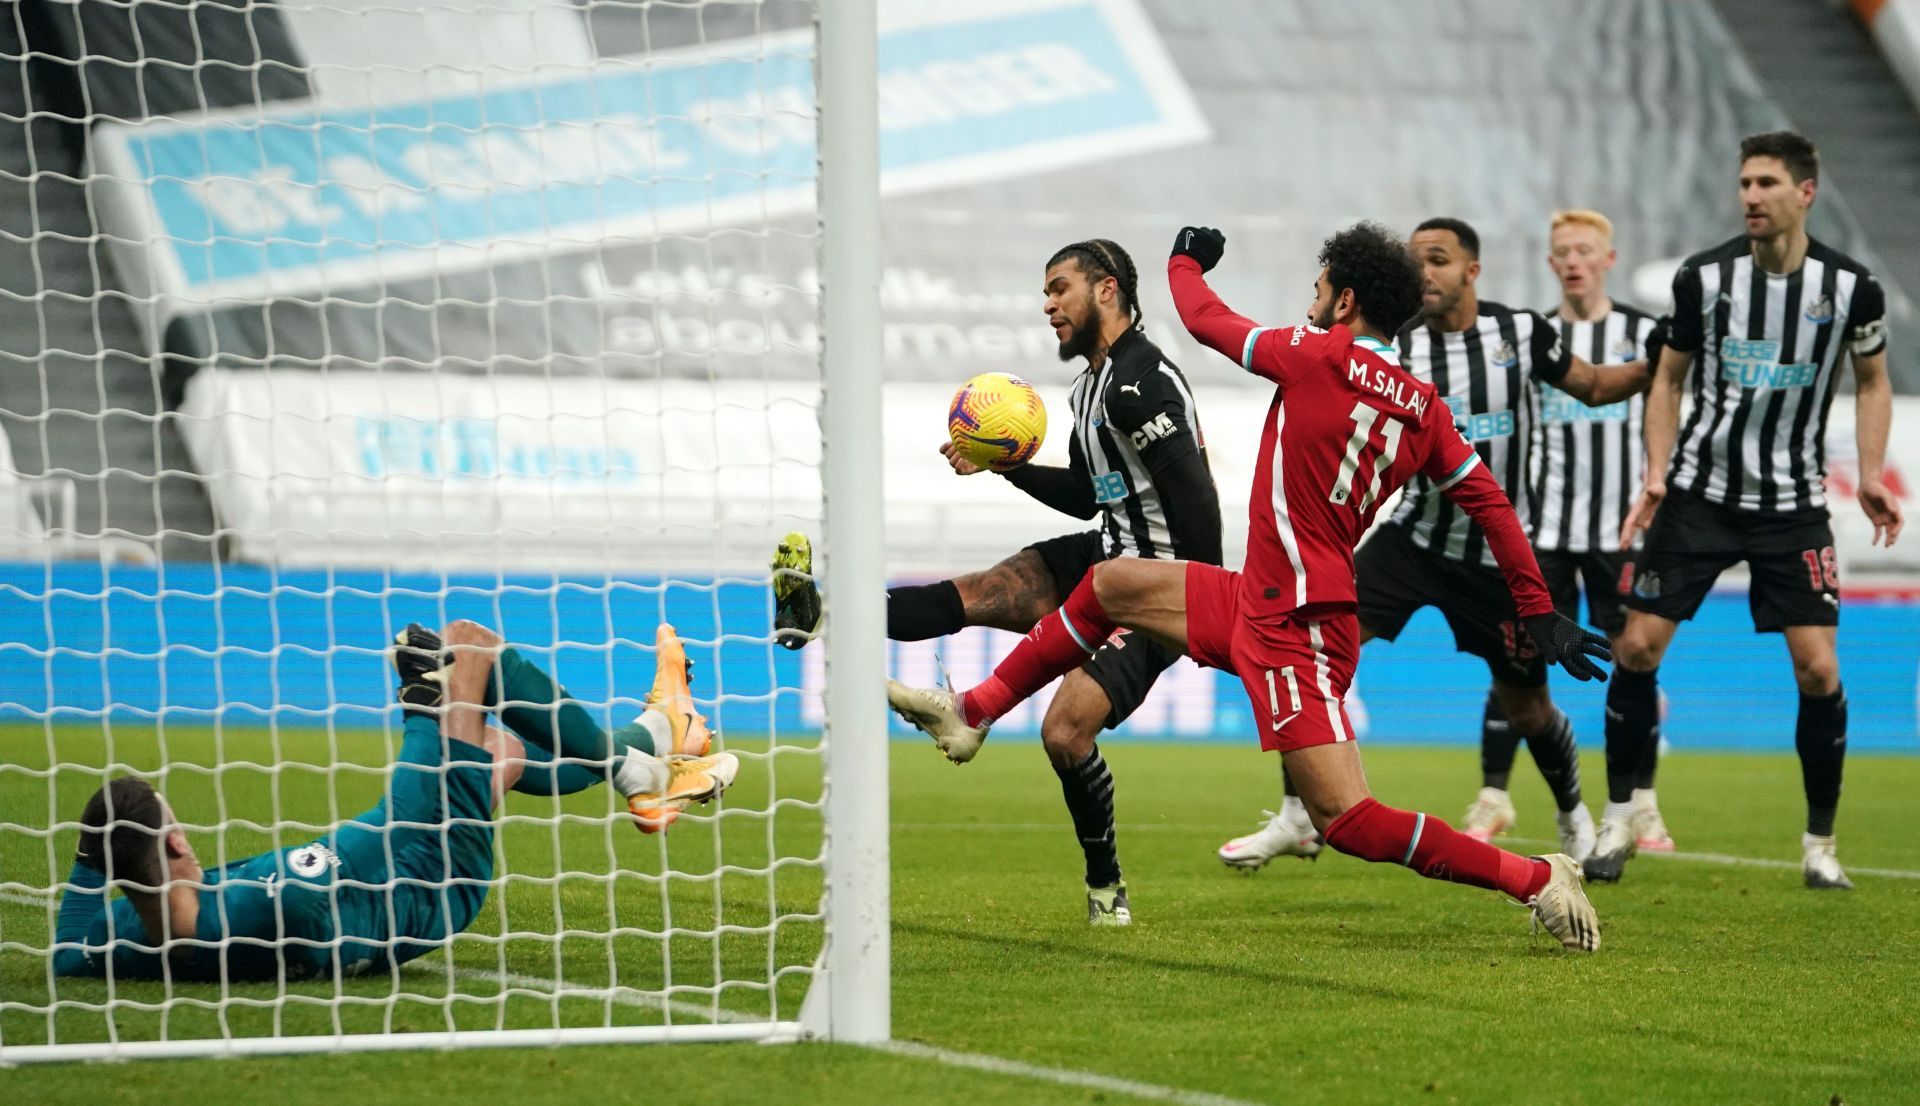 Newcastle United take on Liverpool this week